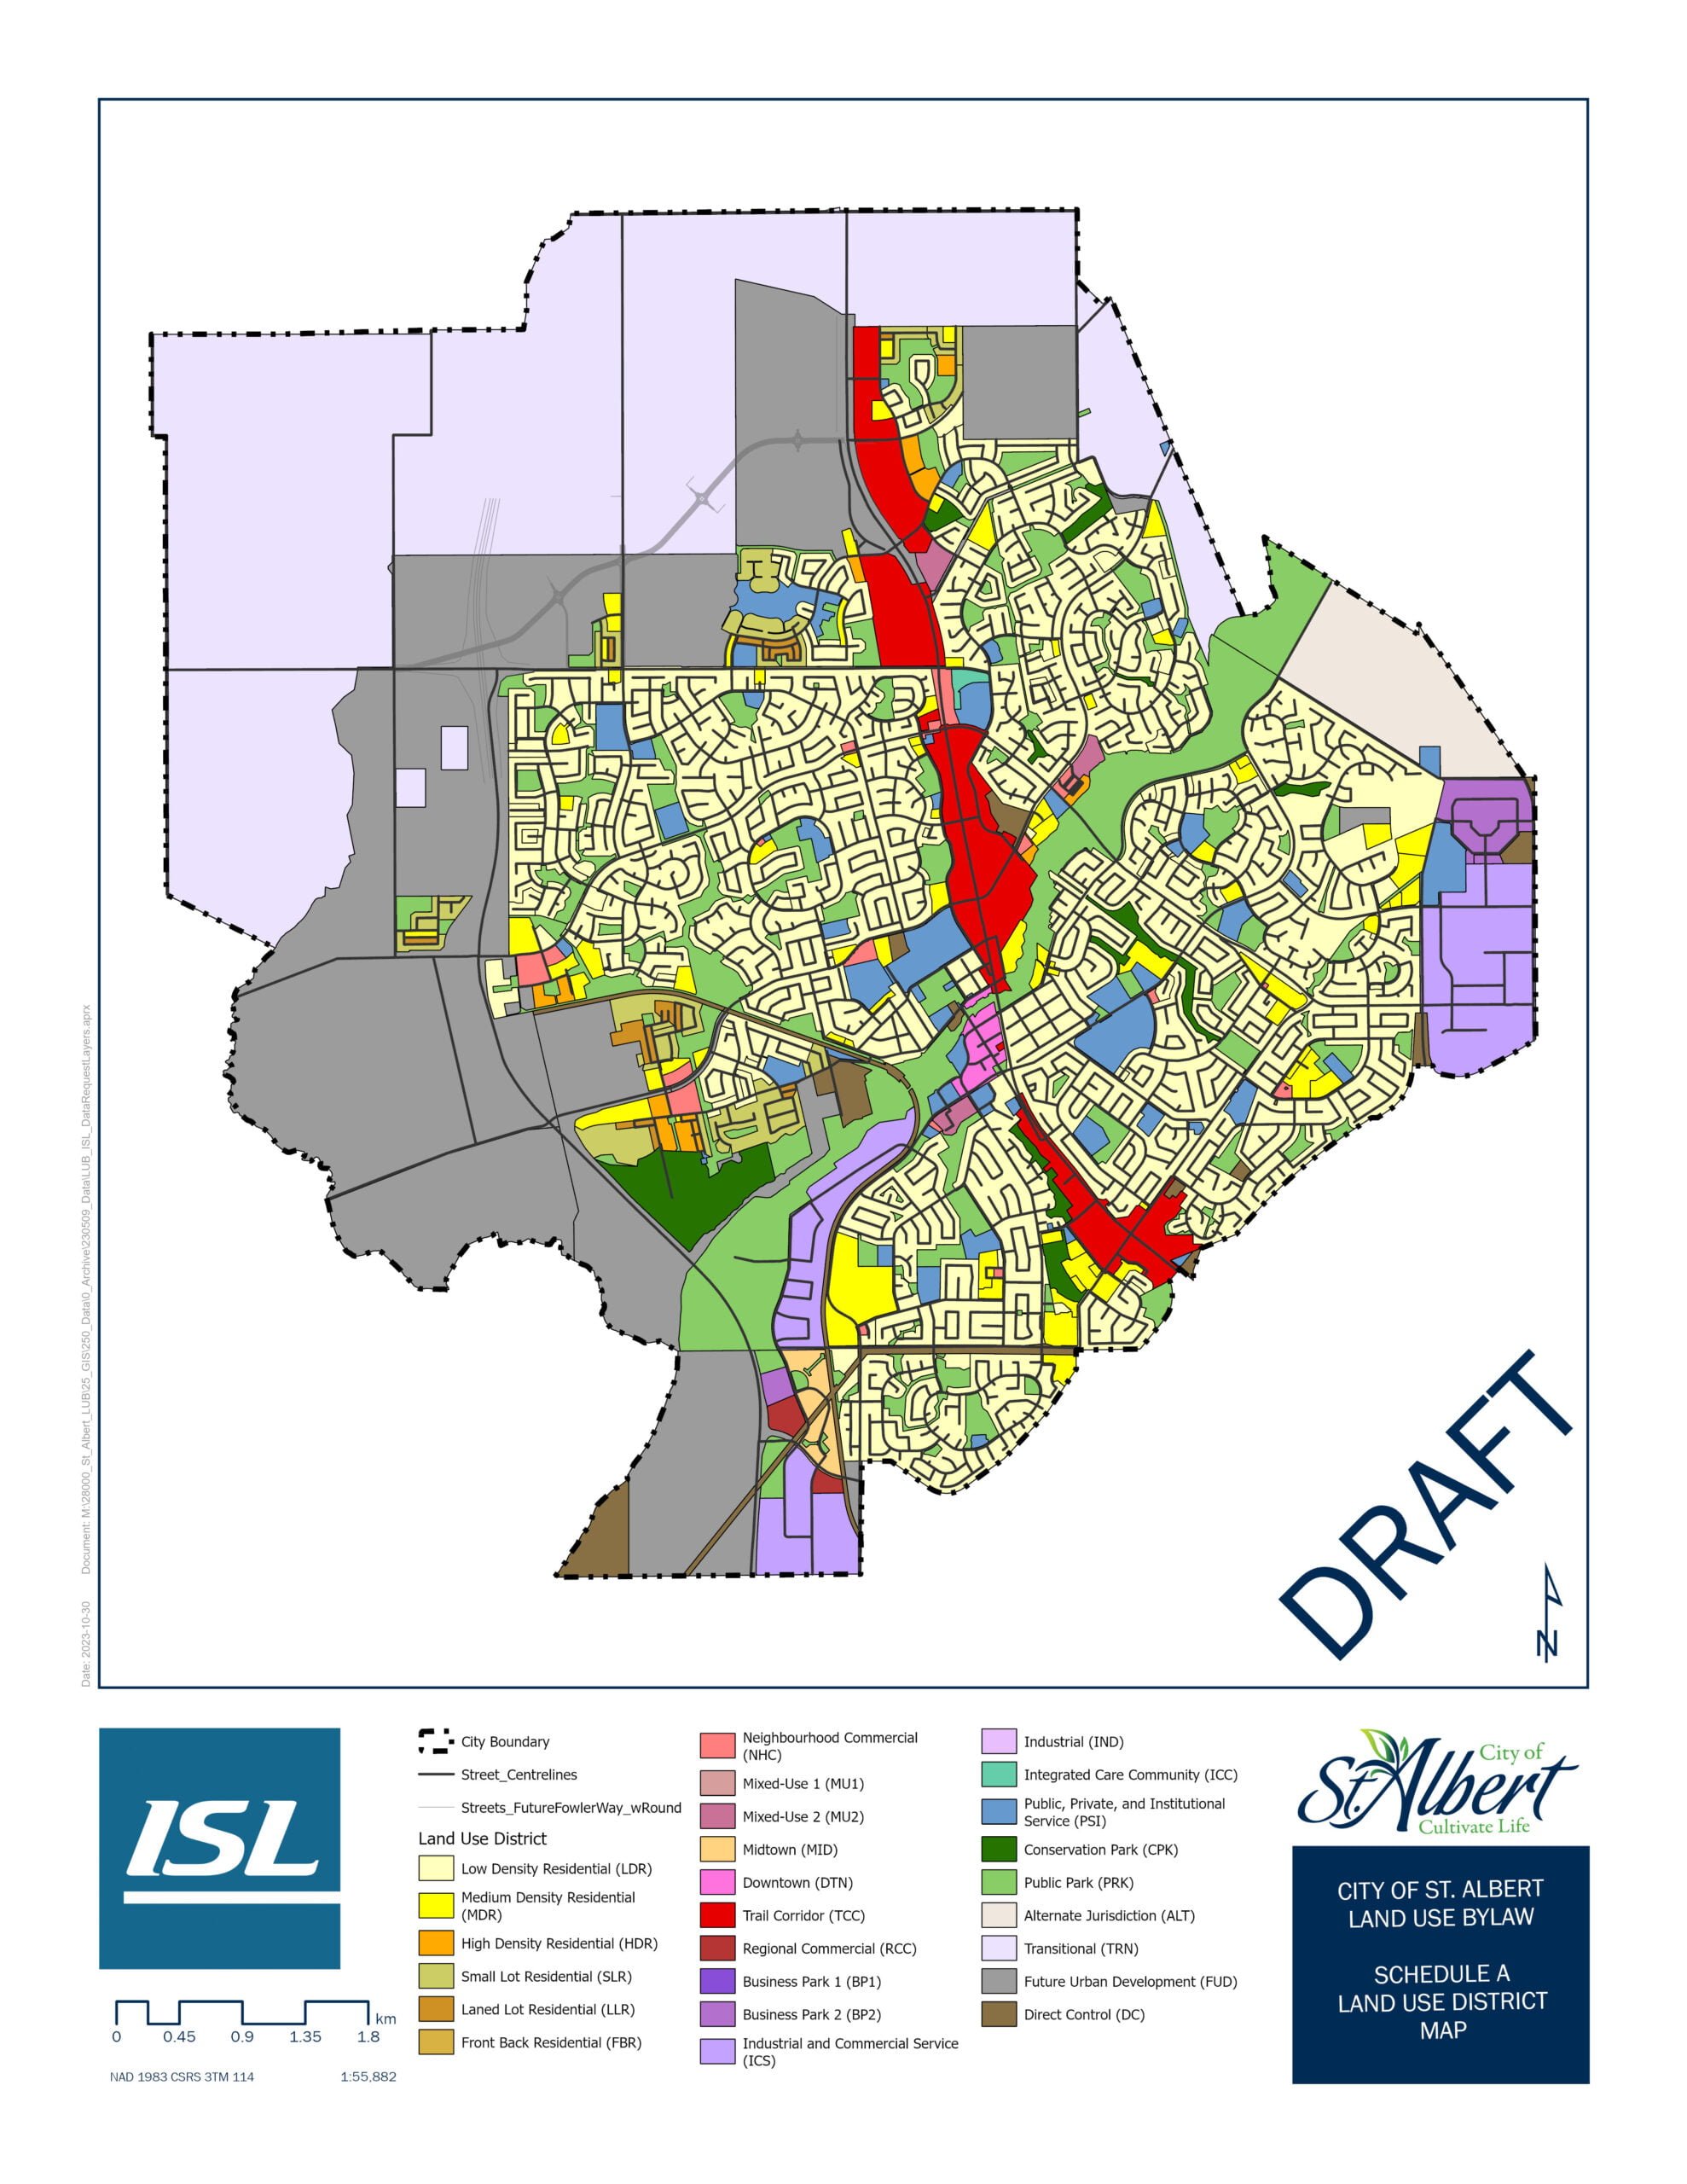 St. Albert Land Use By-law land use district map.